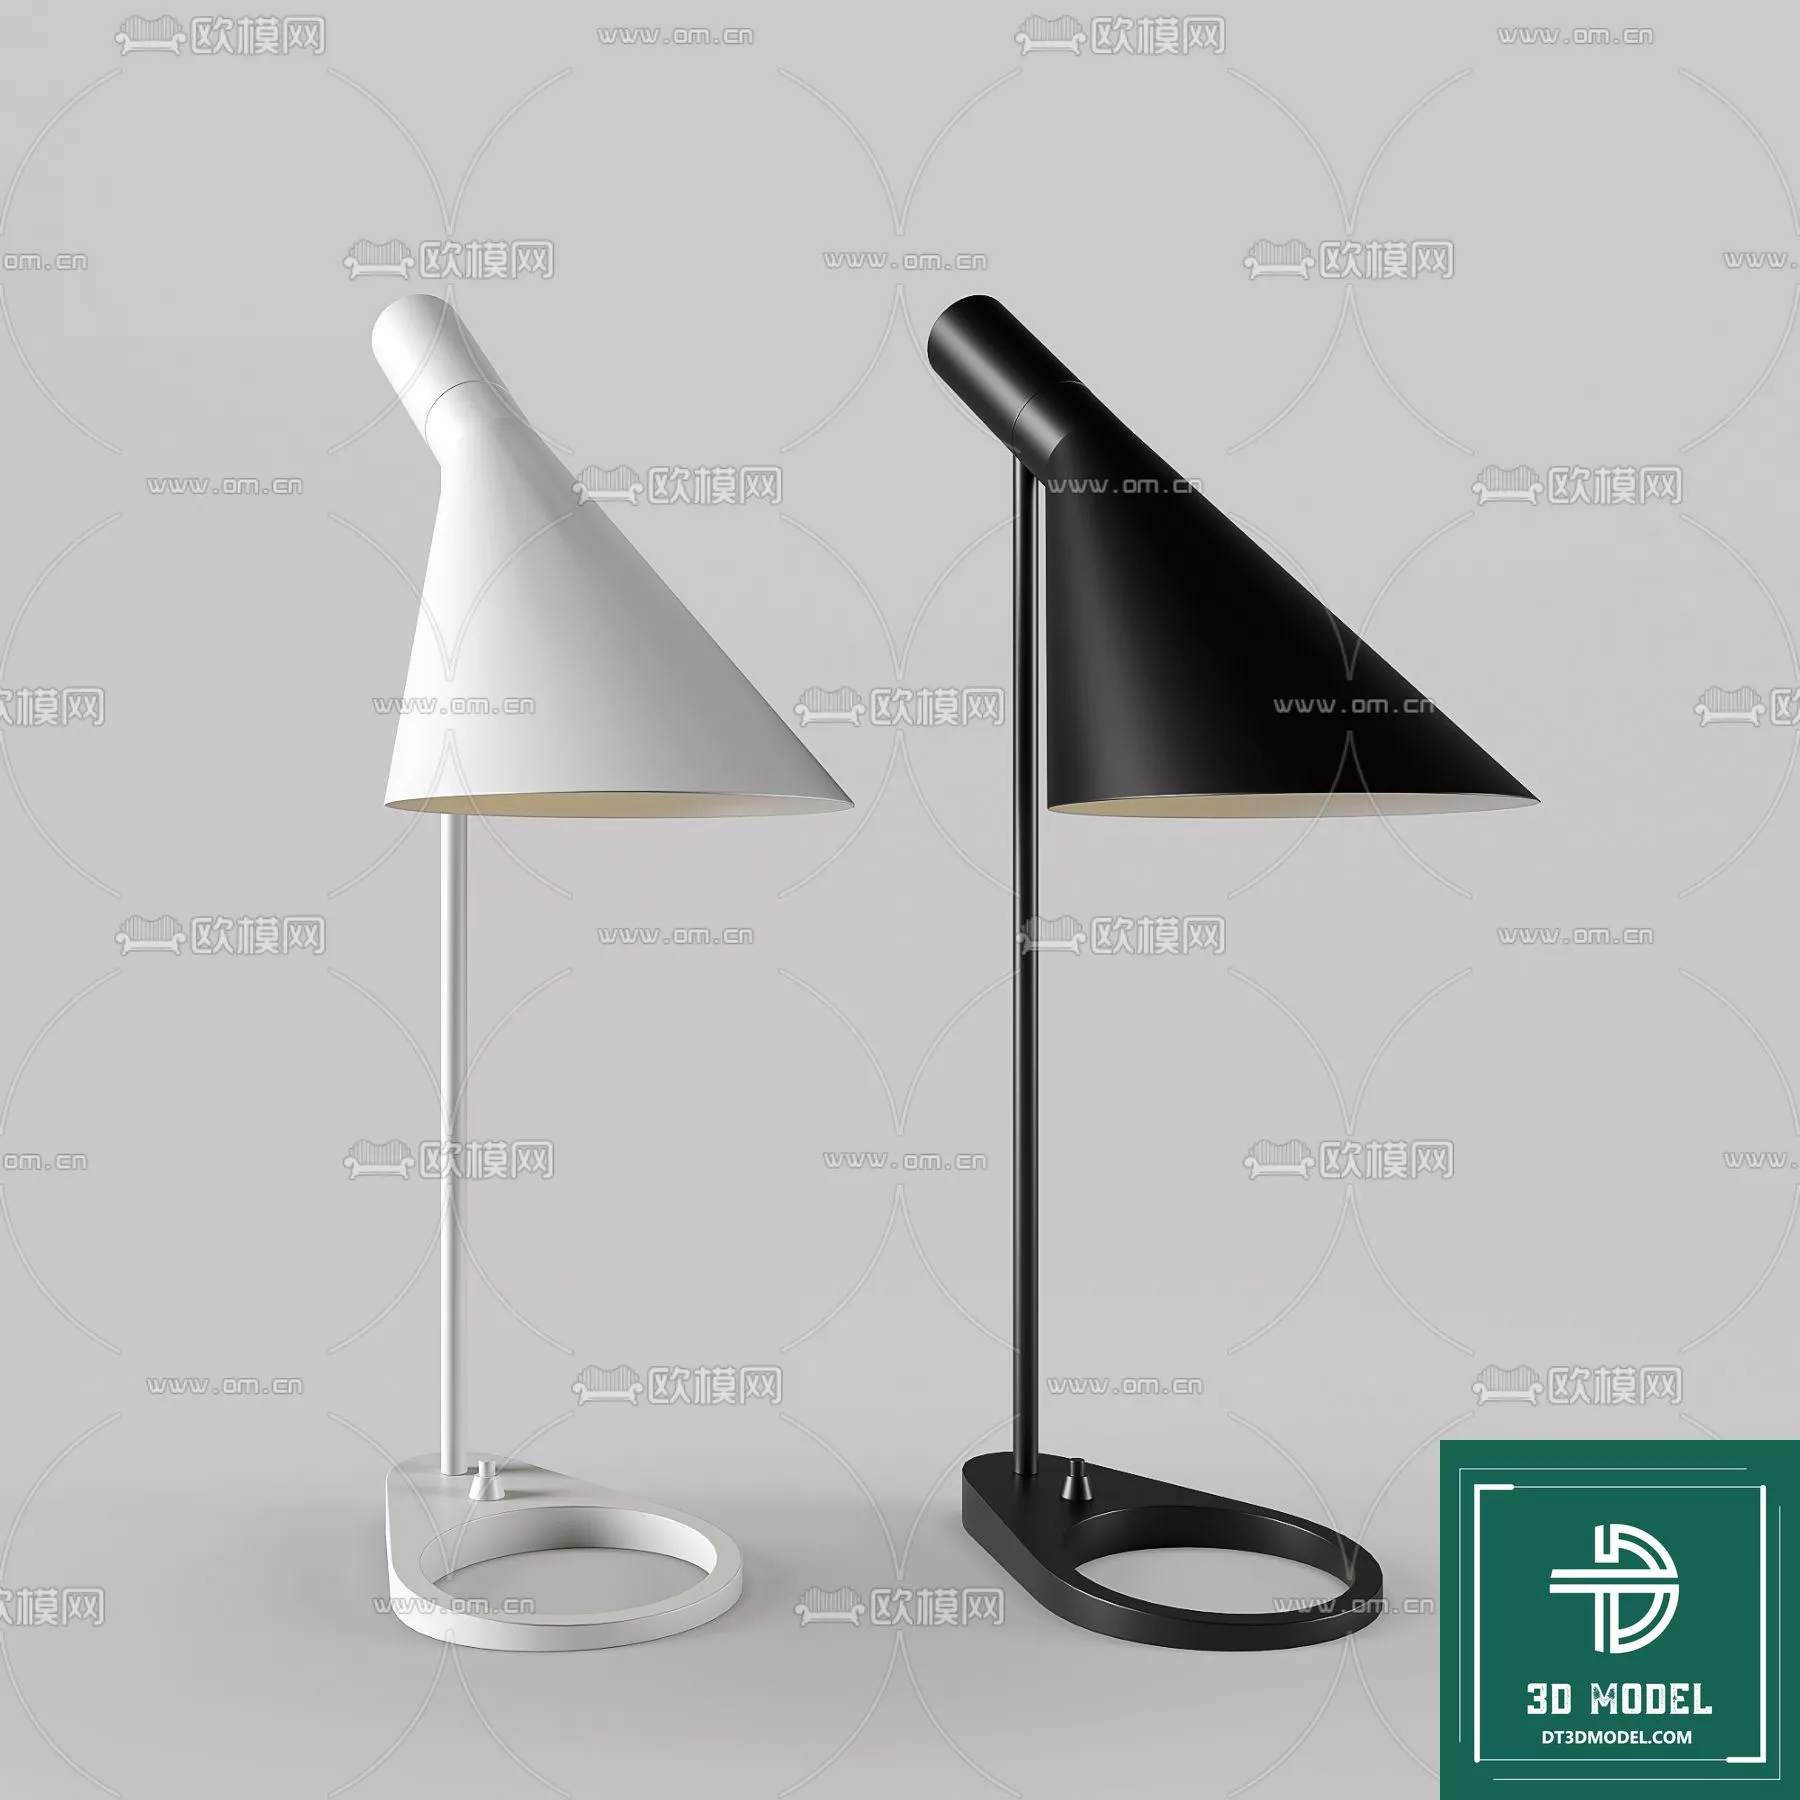 MODERN TABLE LAMP - SKETCHUP 3D MODEL - VRAY OR ENSCAPE - ID14506